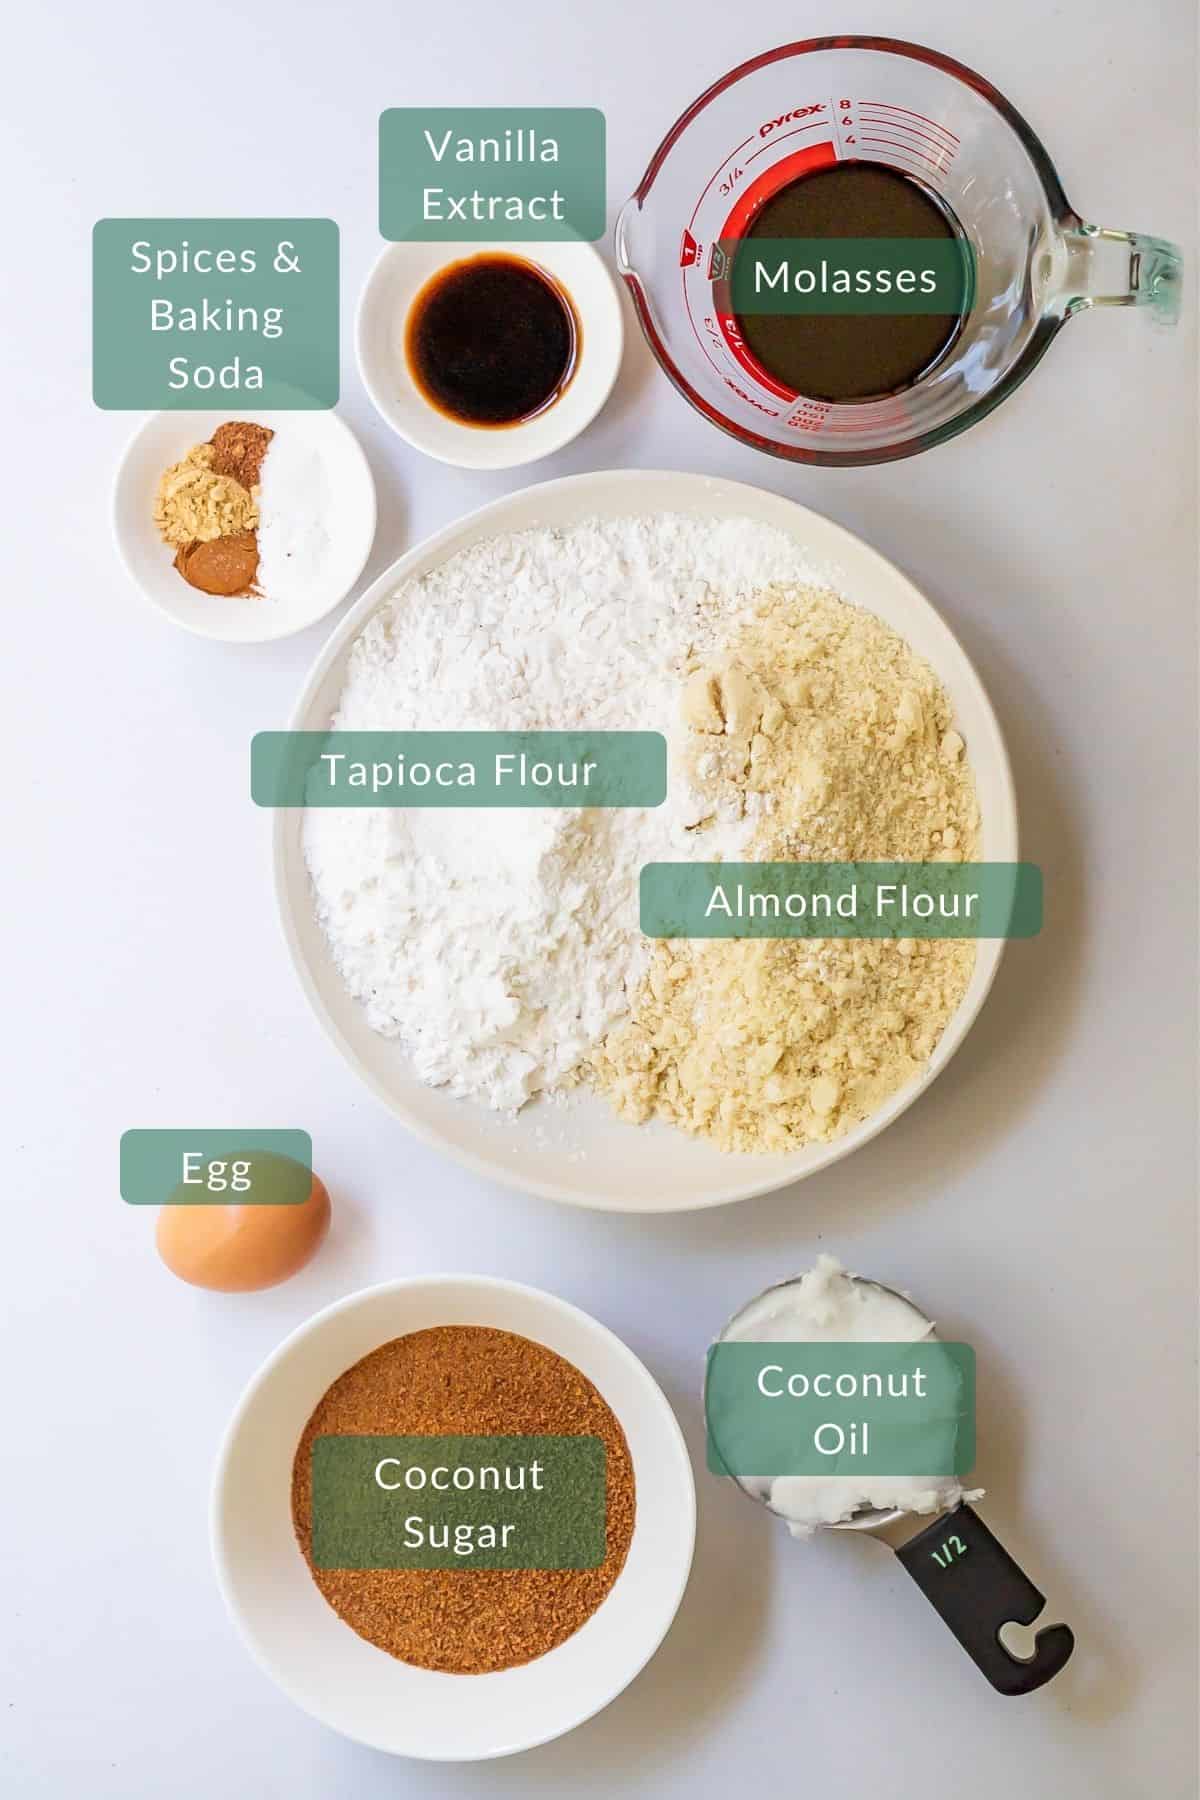 Overhead view of the 10 ingredients you need to make this recipe laid out in the correct measurements.